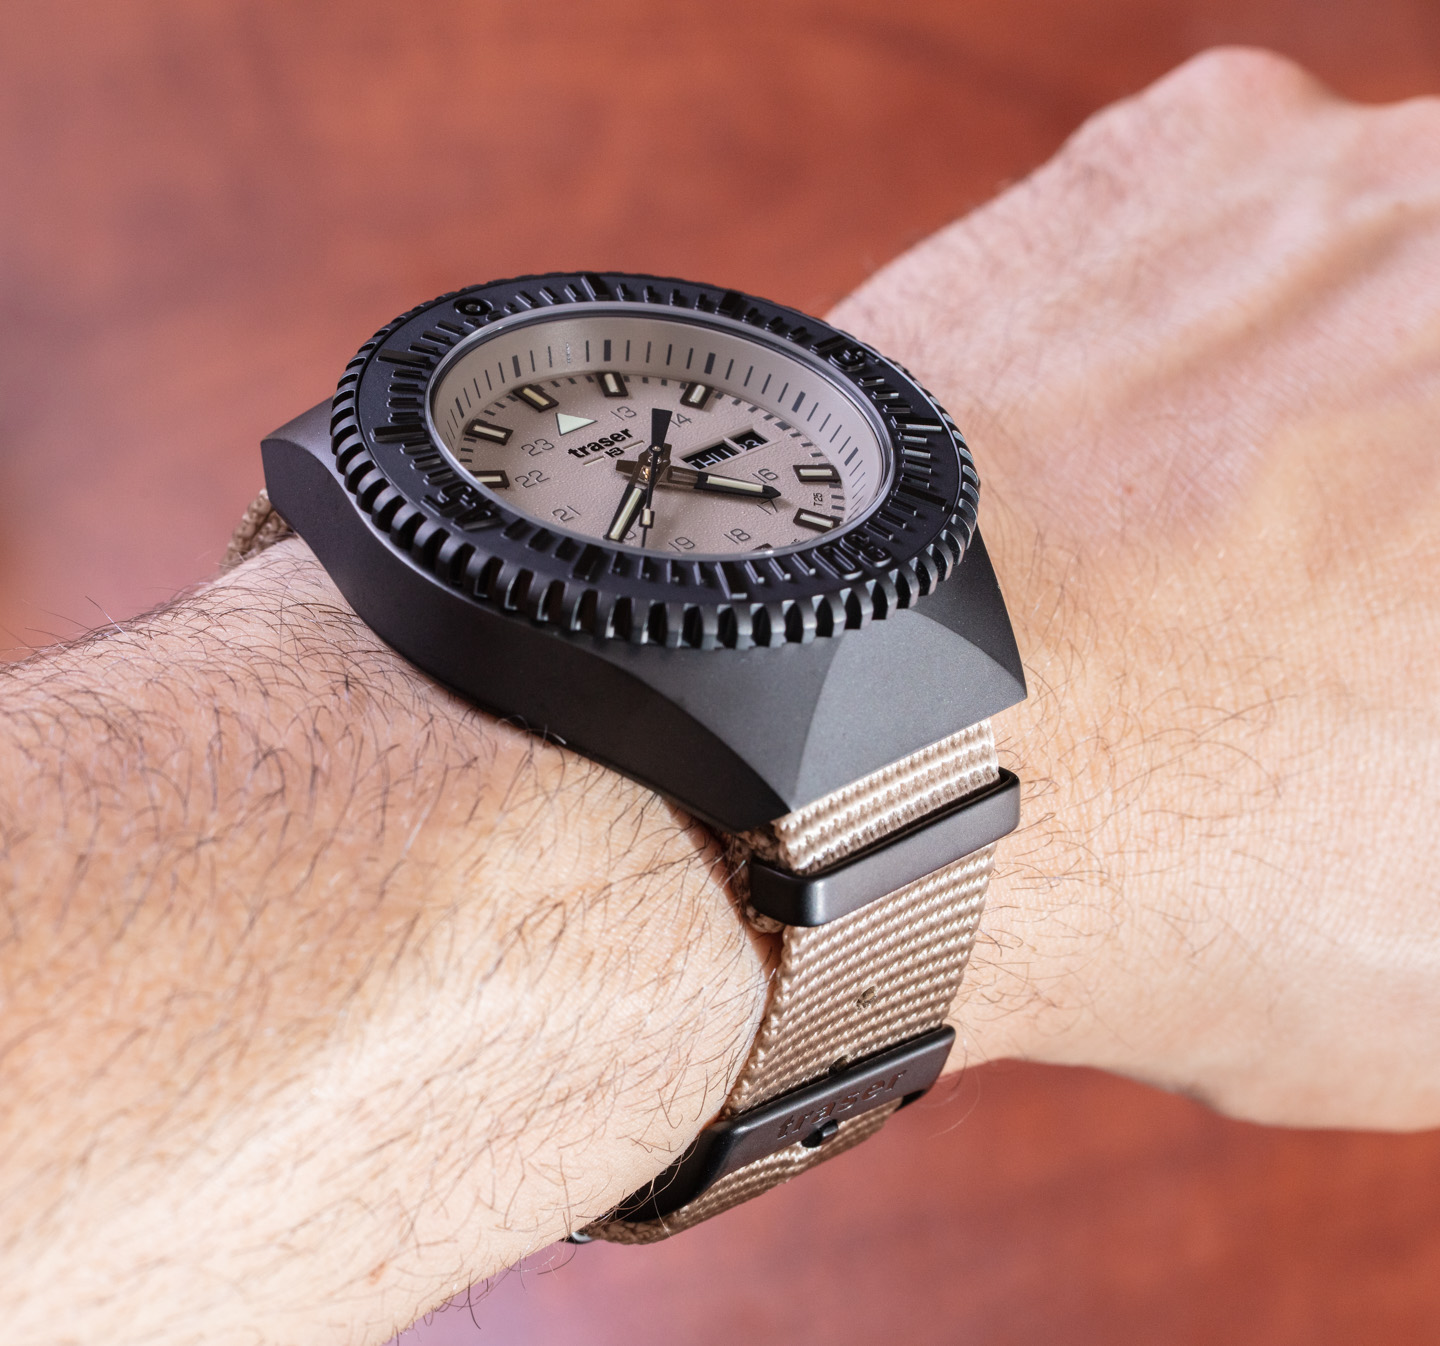 Hands-On: Traser P69 Black Stealth Watch | aBlogtoWatch